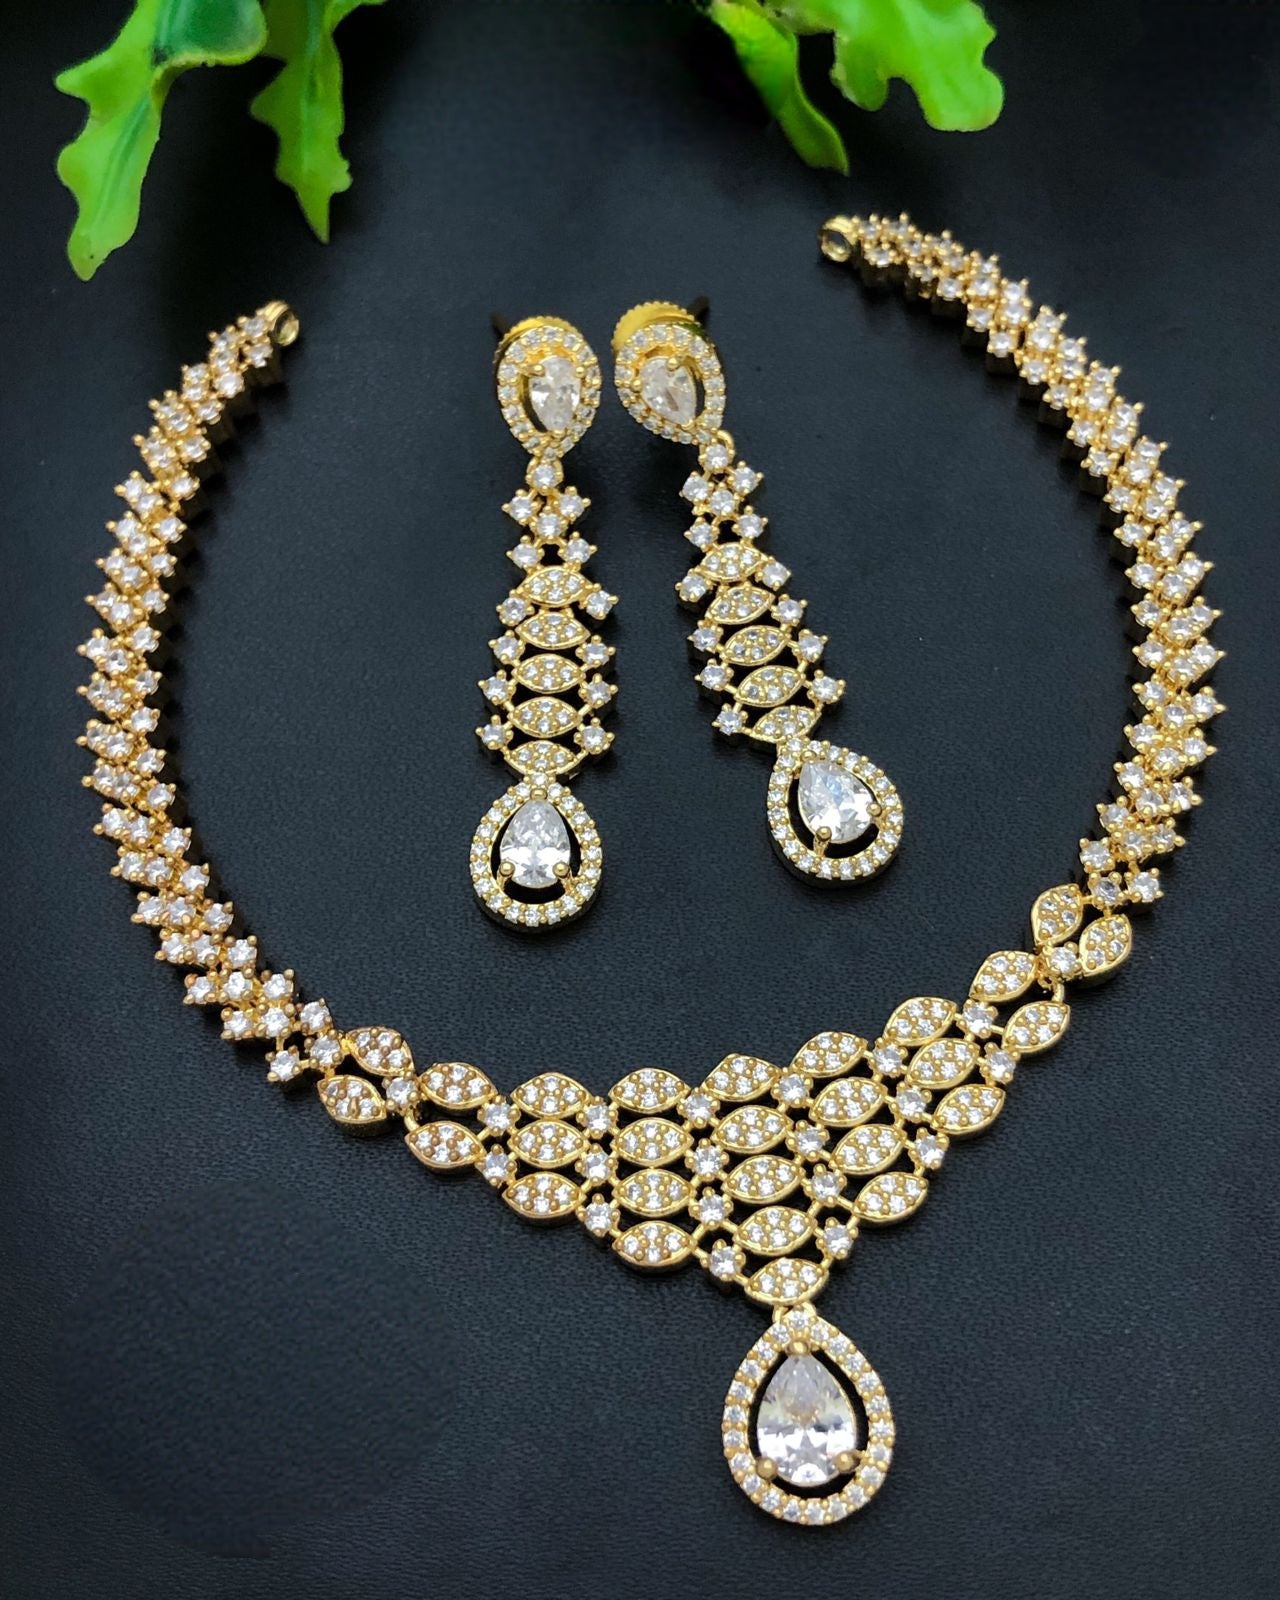 Gold Plated Cz American Diamond necklace Earring set | Indian Bollywood Jewelry | Trending Party necklace Earring set | Bridesmaid Gift